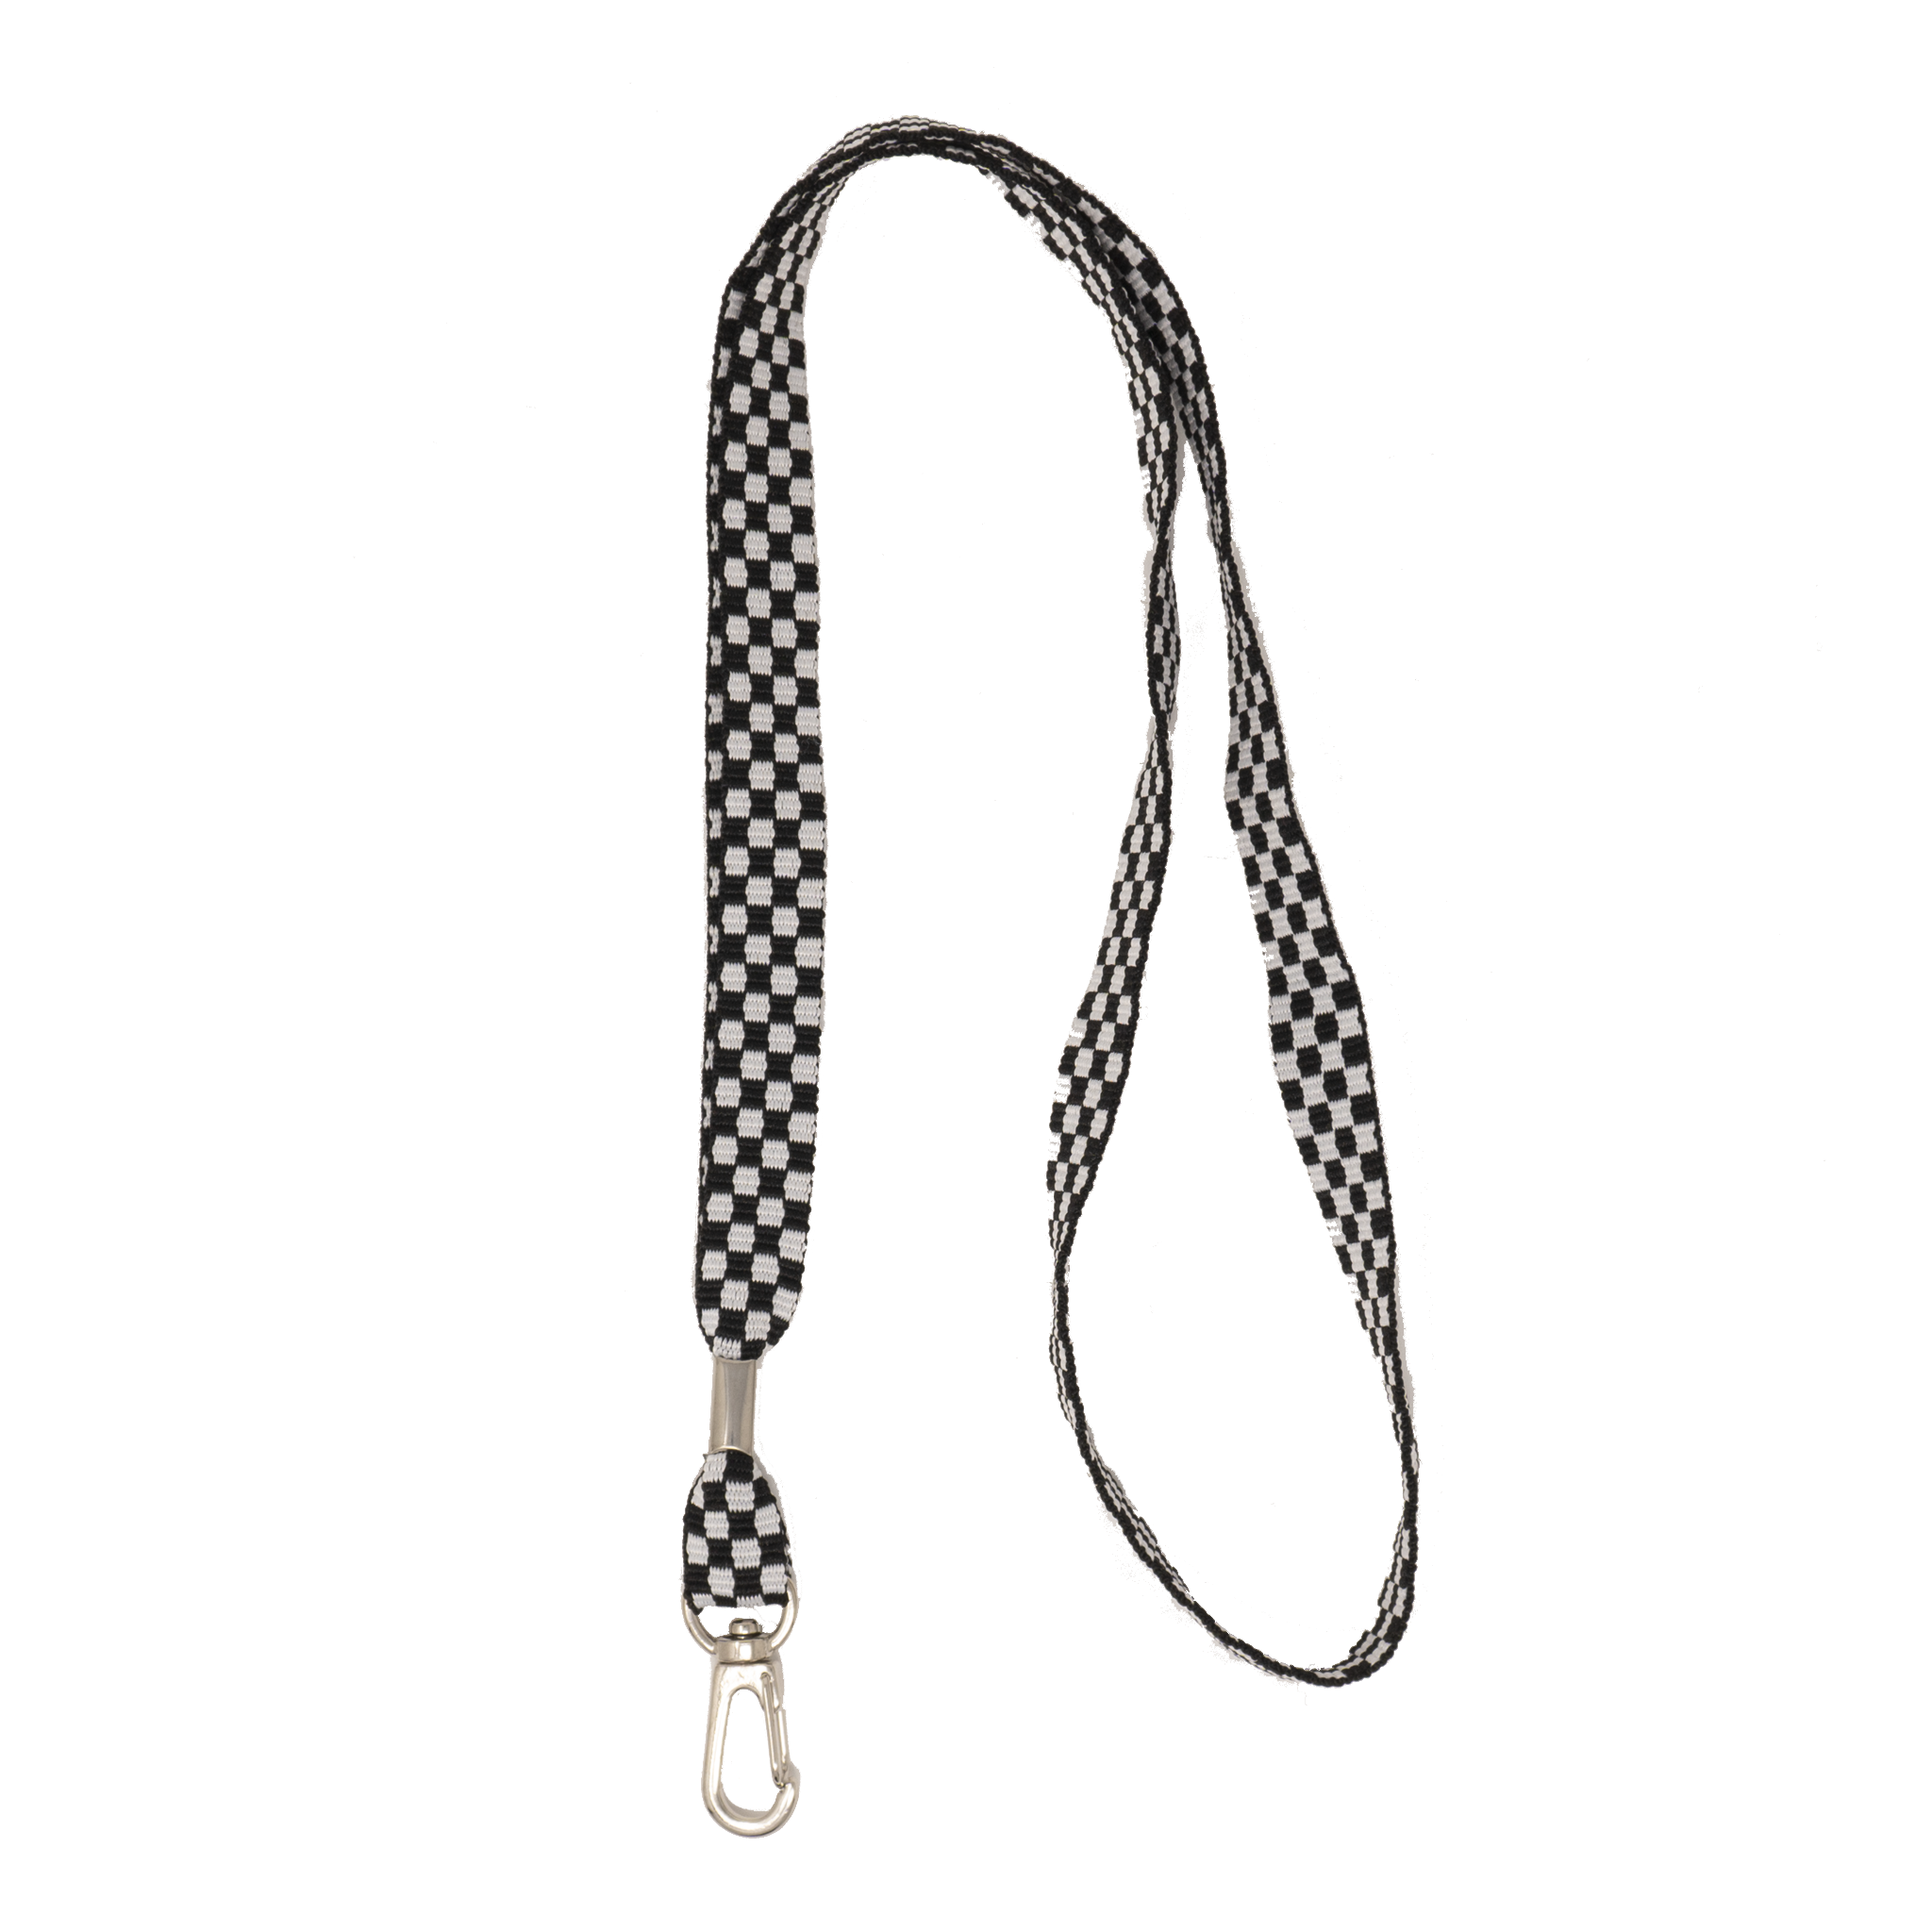 My Fave Lanyard in Checkered